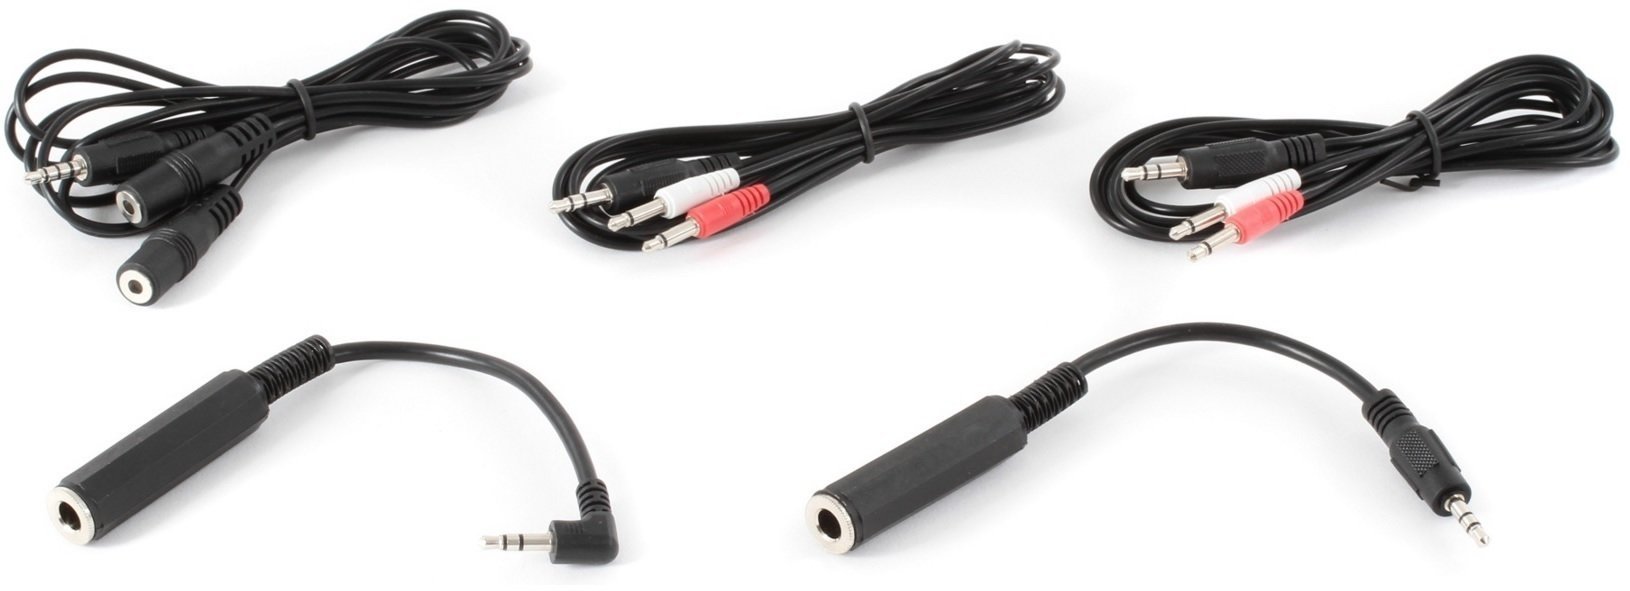 Cablu Audio Keith McMillen CV Cable Kit